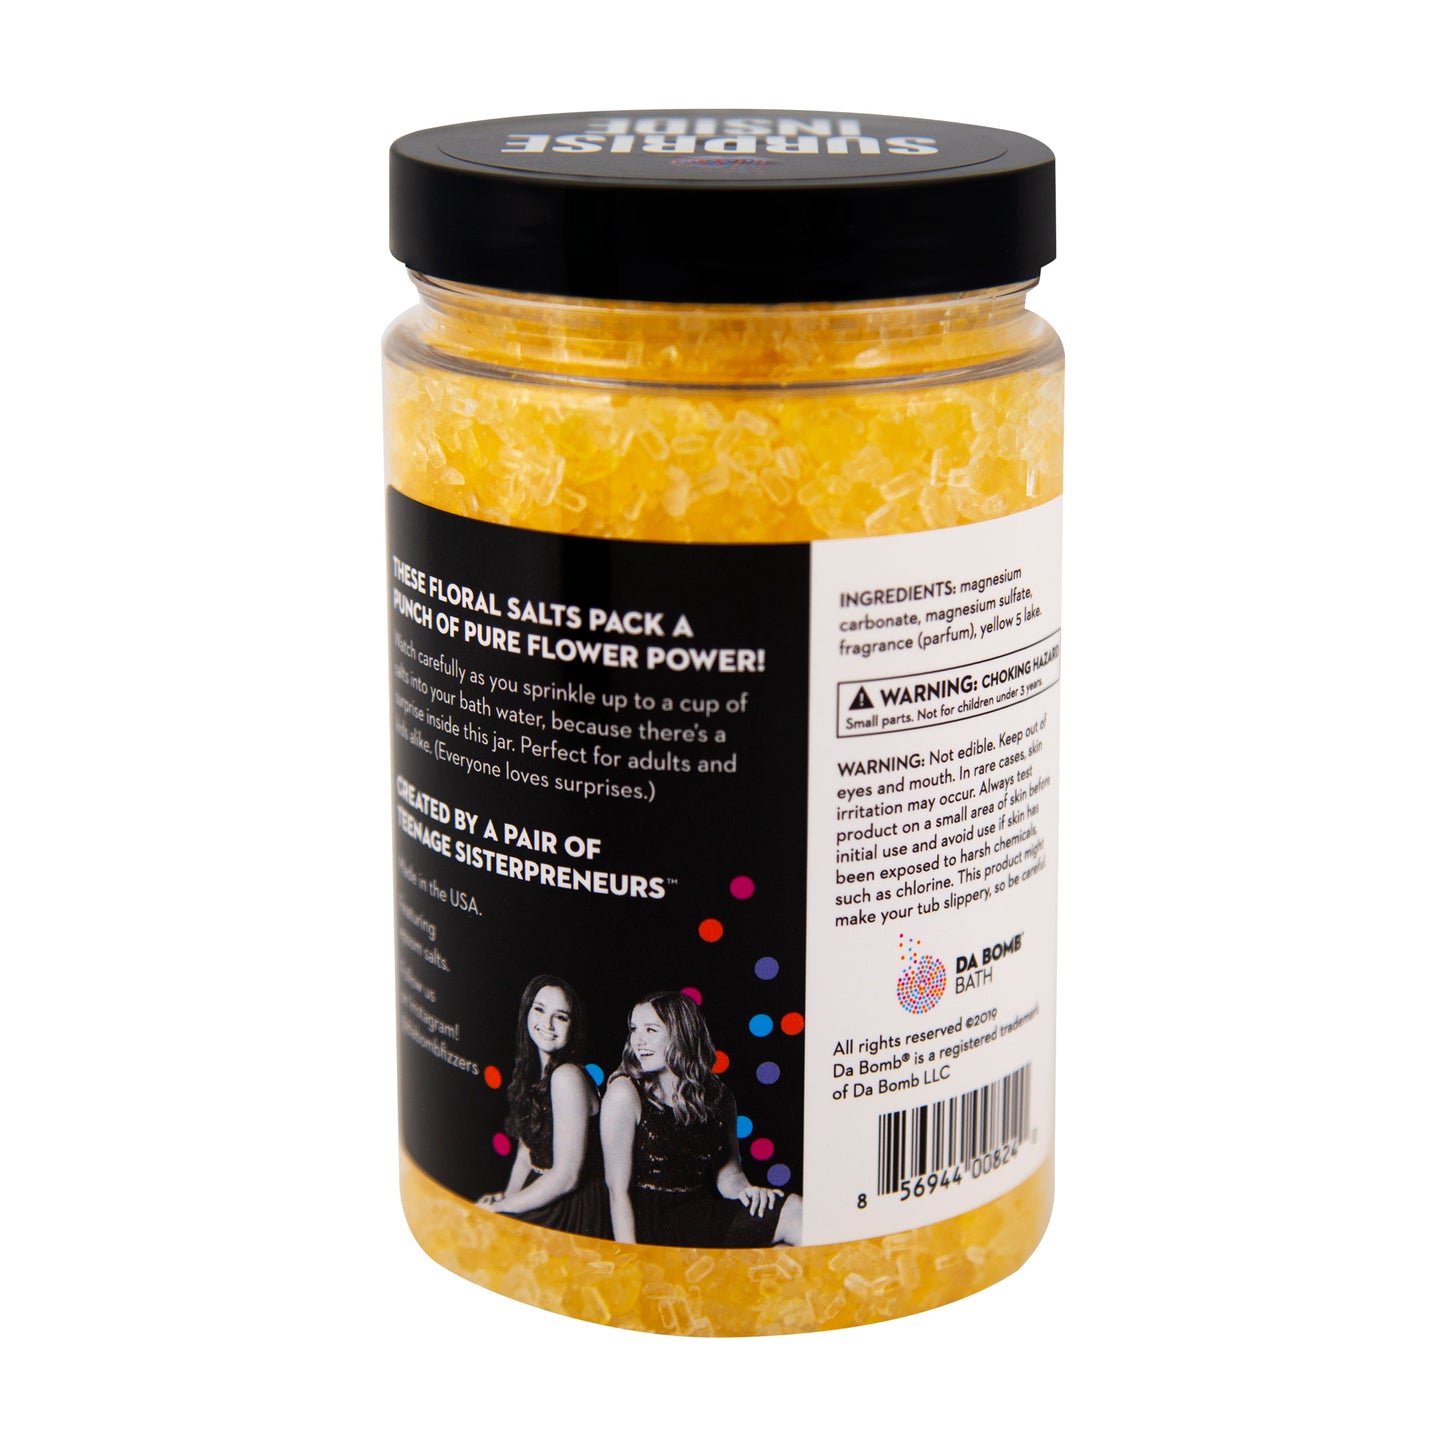 Back of clear plastic jar filled with yellow bath salt that smells like primrose. Contains a fun surprise inside.